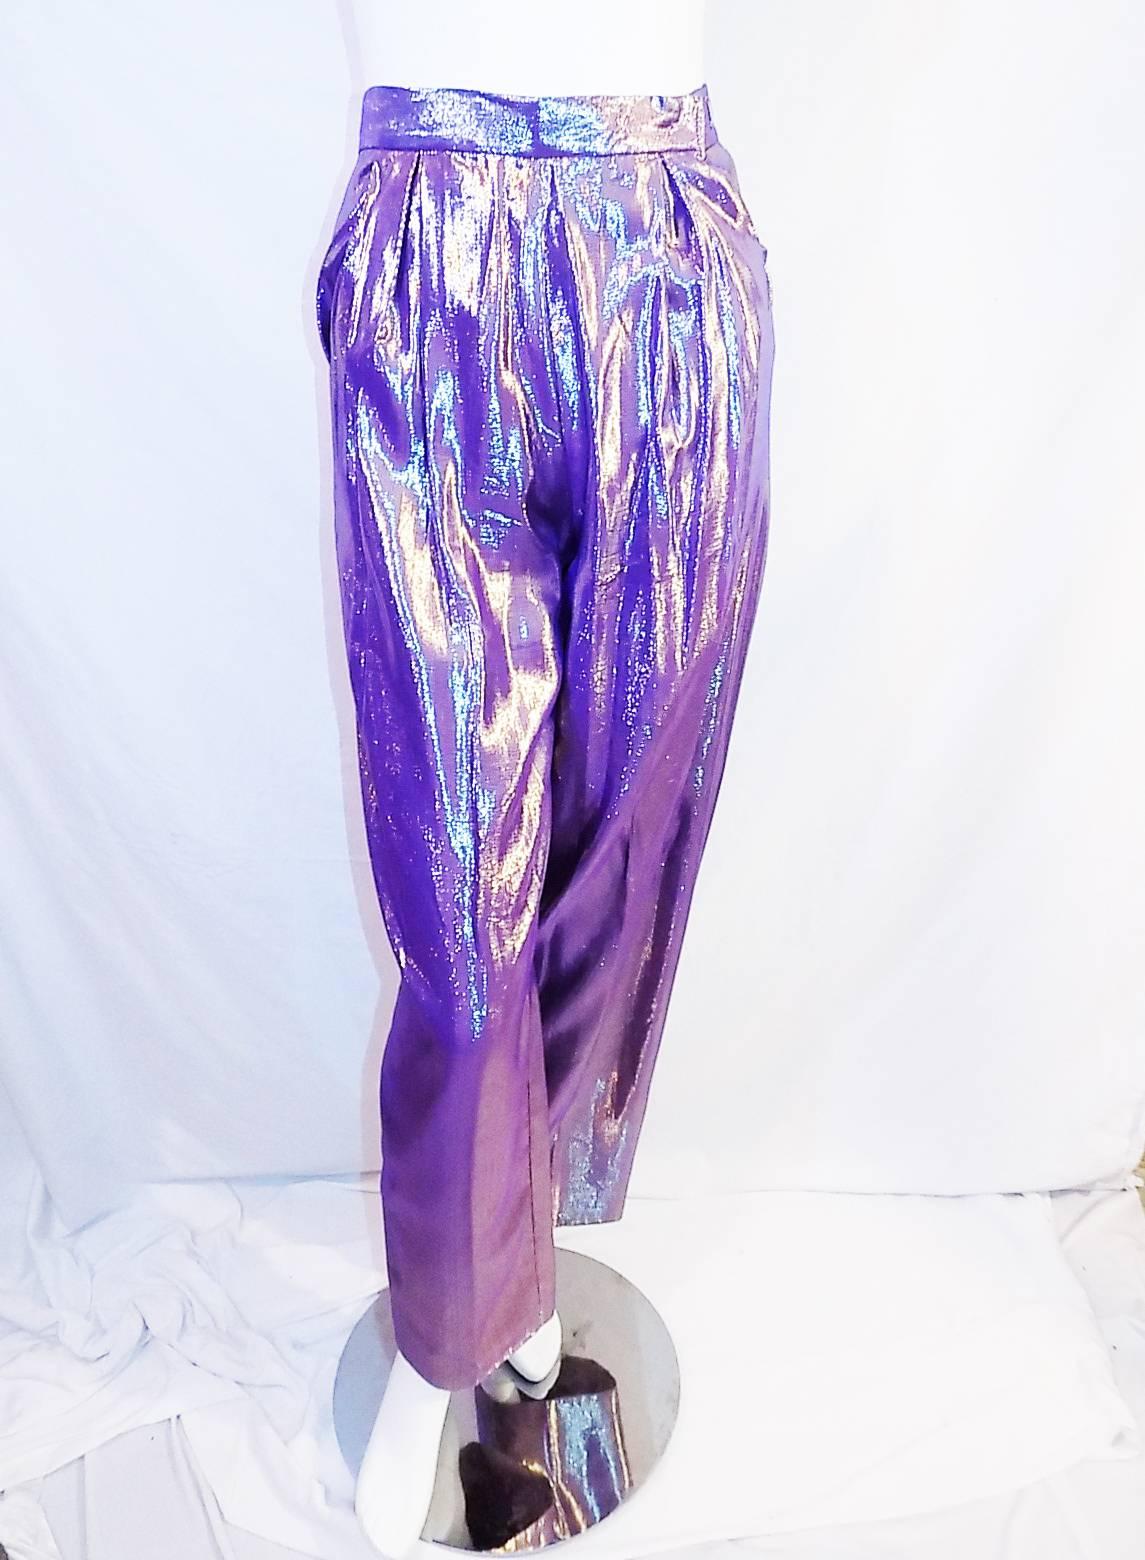 Stunning in pristine condition Giorgio Sant Angelo vintage lame purple pants disco era!! High waited with pleated front and side pockets. Flawless. Very small size. States 6 .. please refer to measurements: Waist 24 1/2 